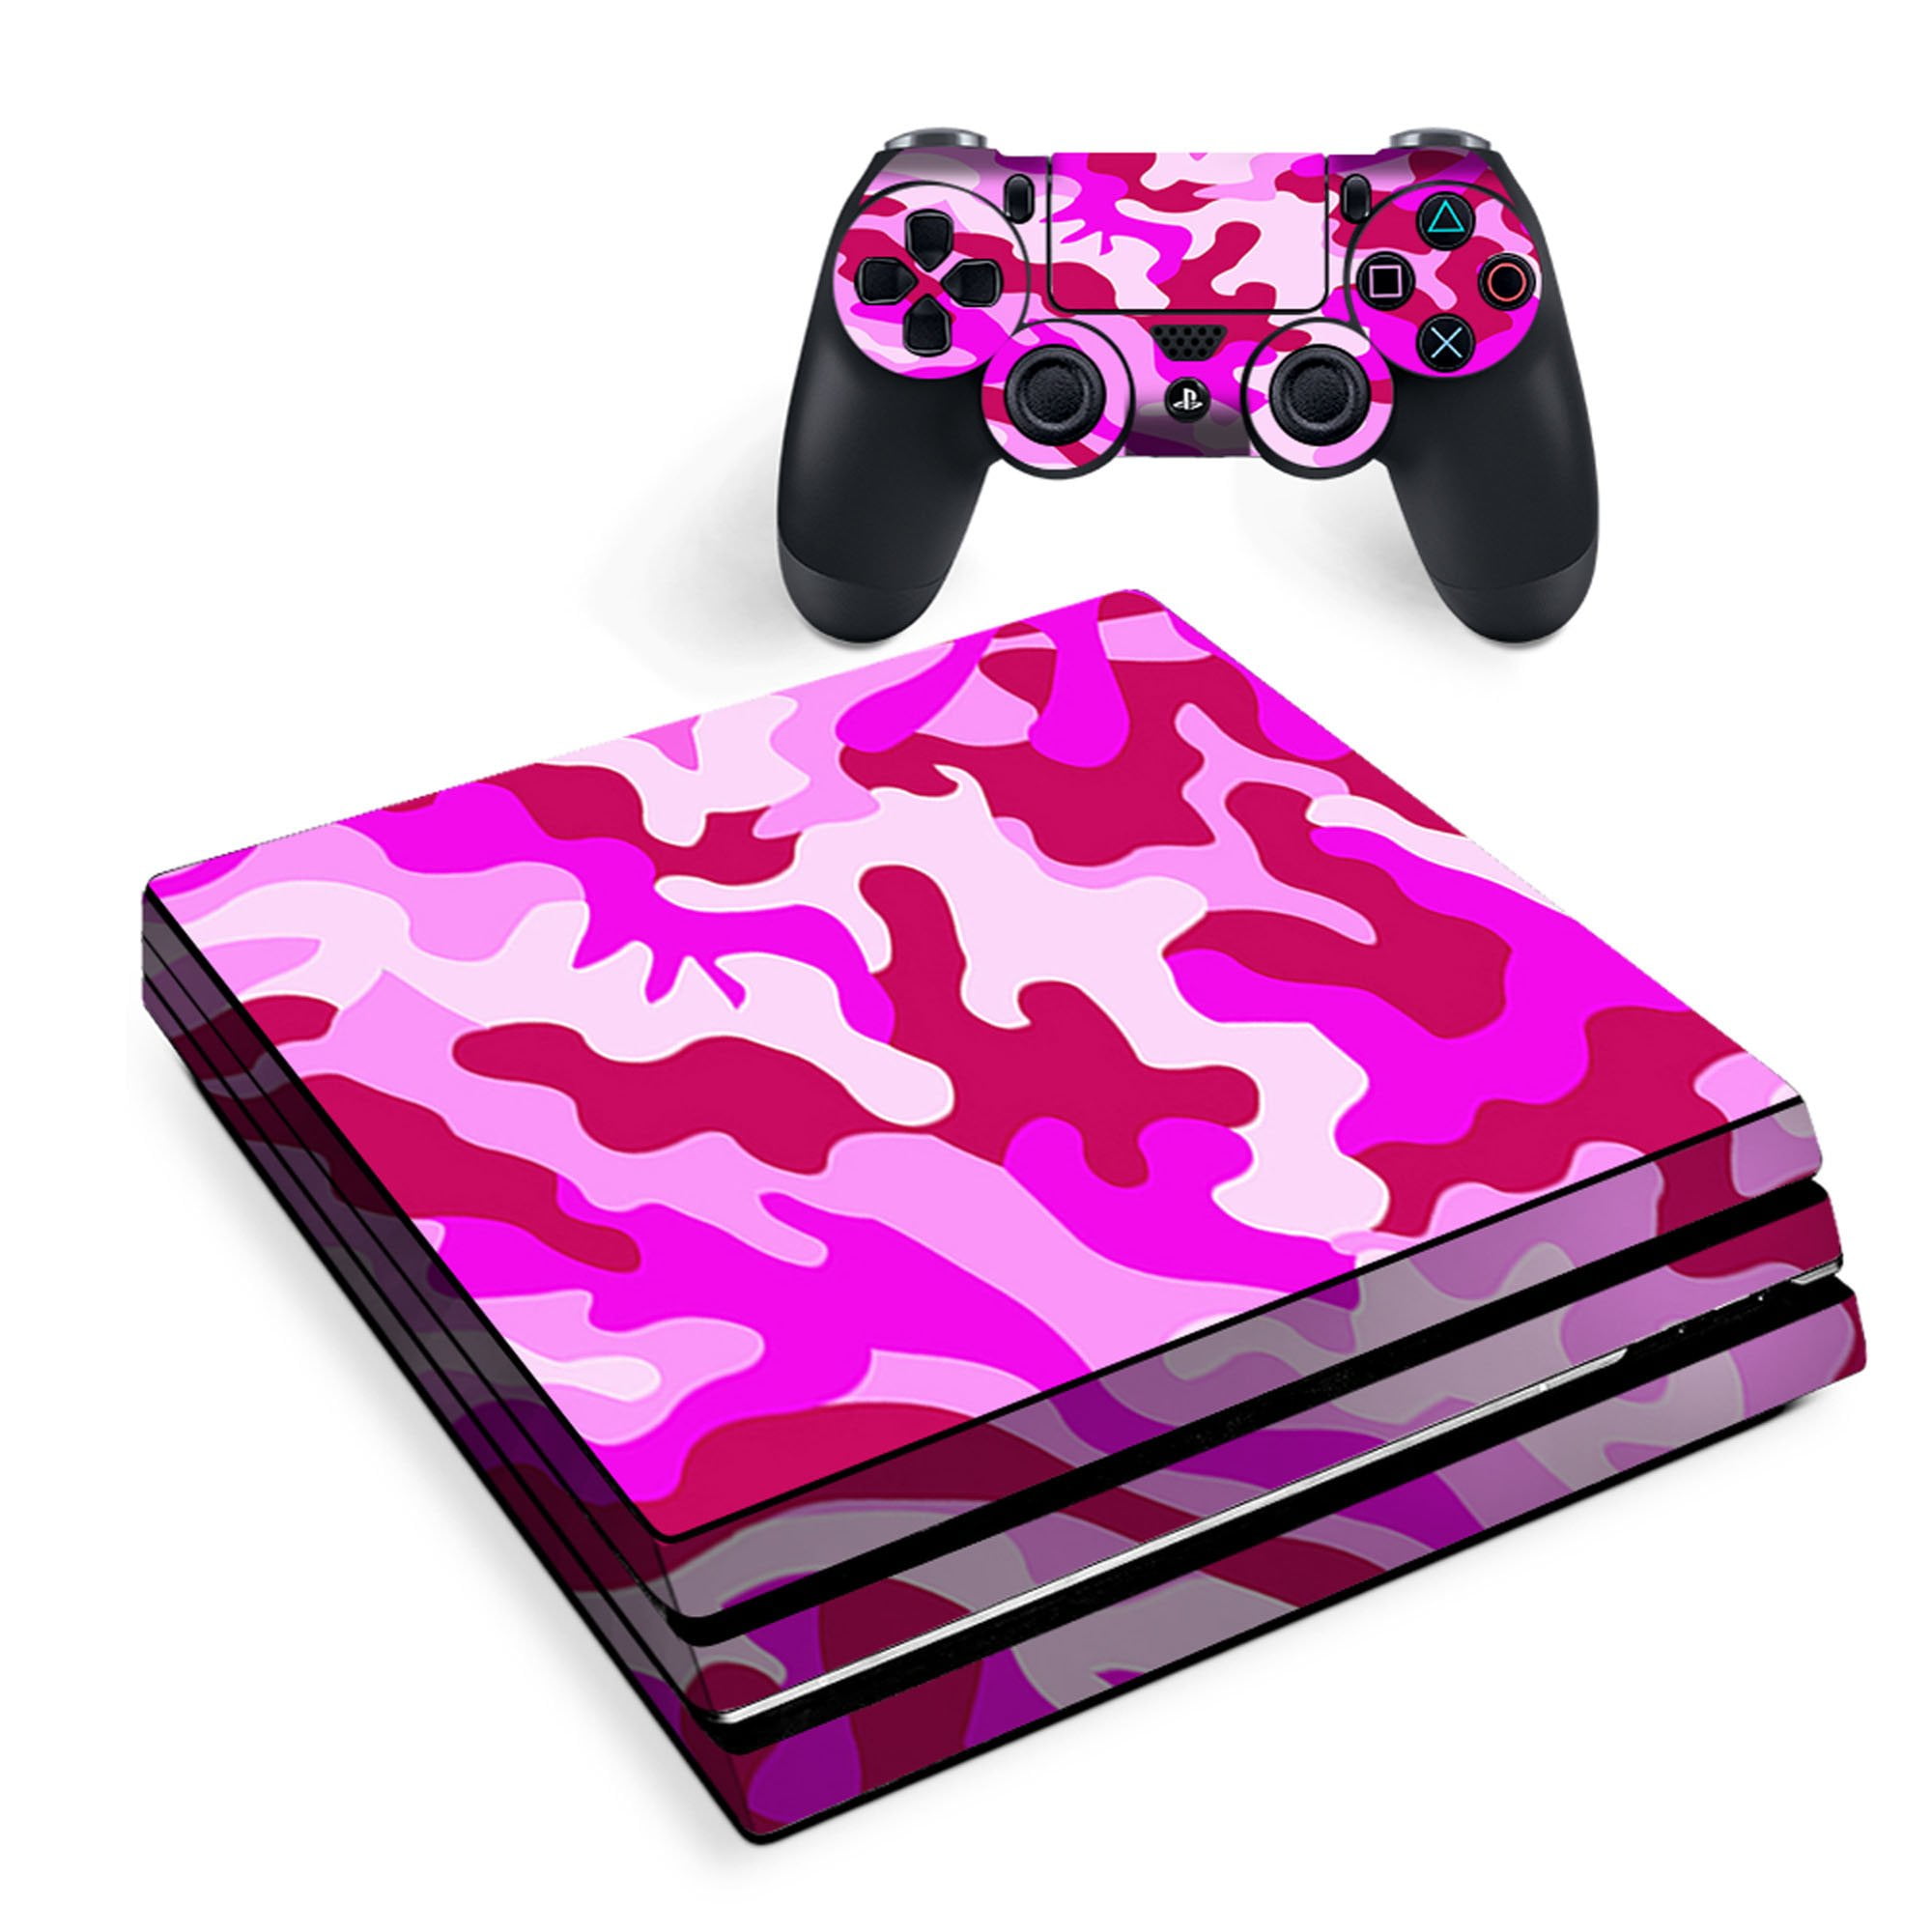 Skin for Sony PS4 Decal Stickers Skins Cover camo, camouflage - Walmart.com